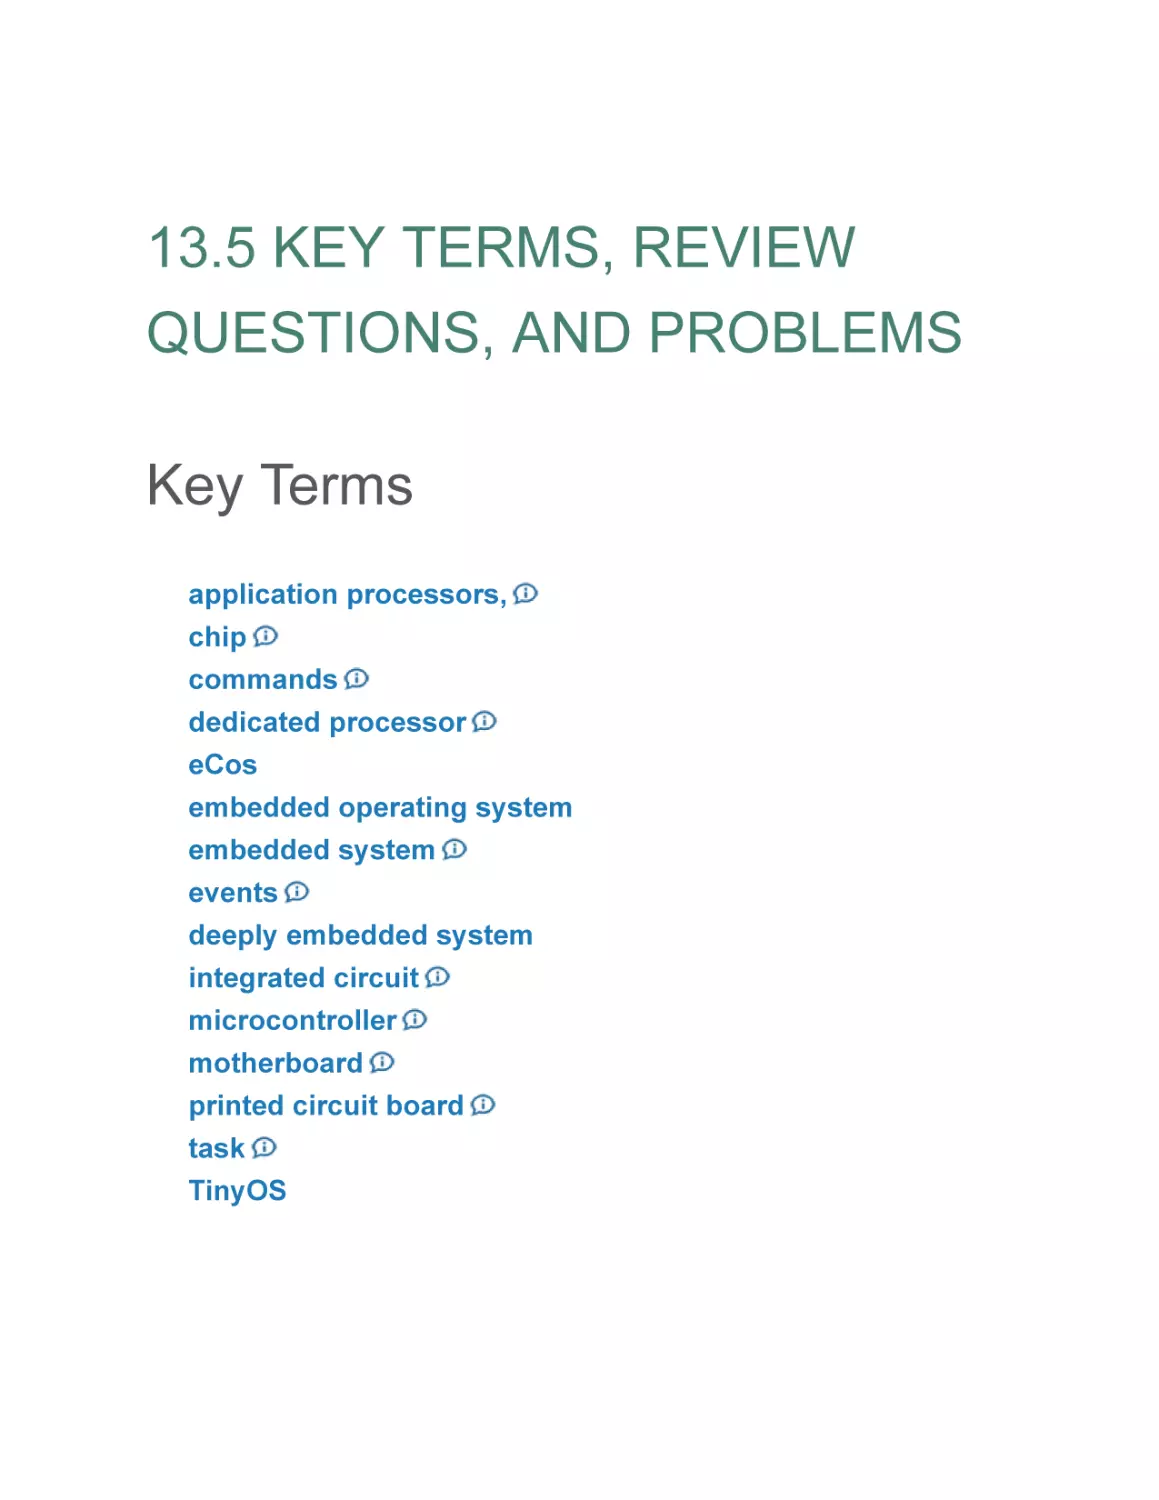 13.5 KEY TERMS, REVIEW QUESTIONS, AND PROBLEMS
Key Terms